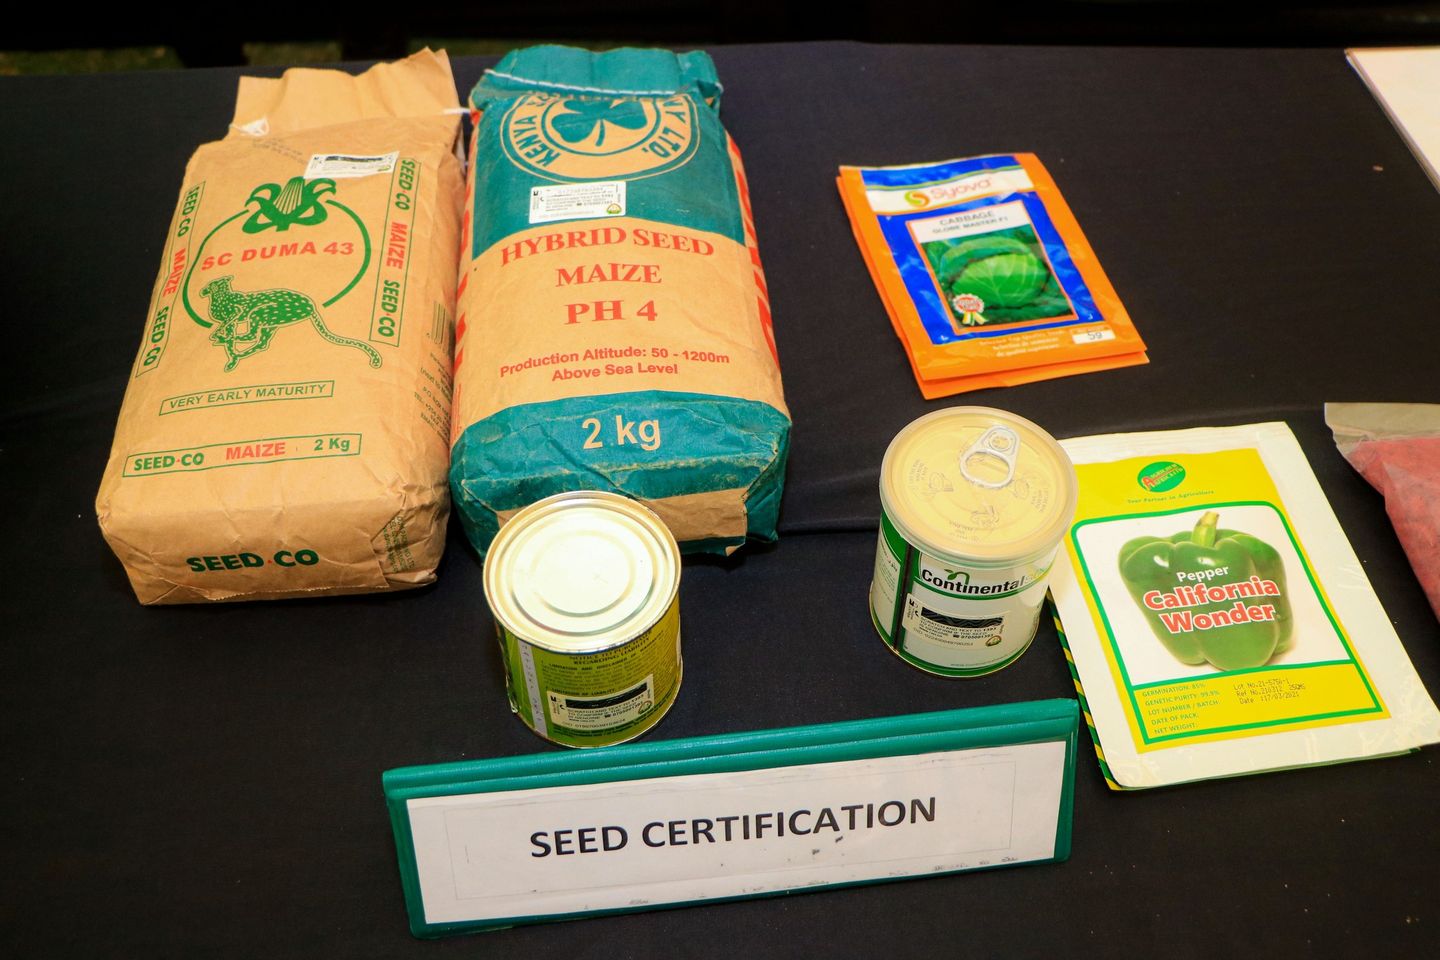 Kephis certified seeds